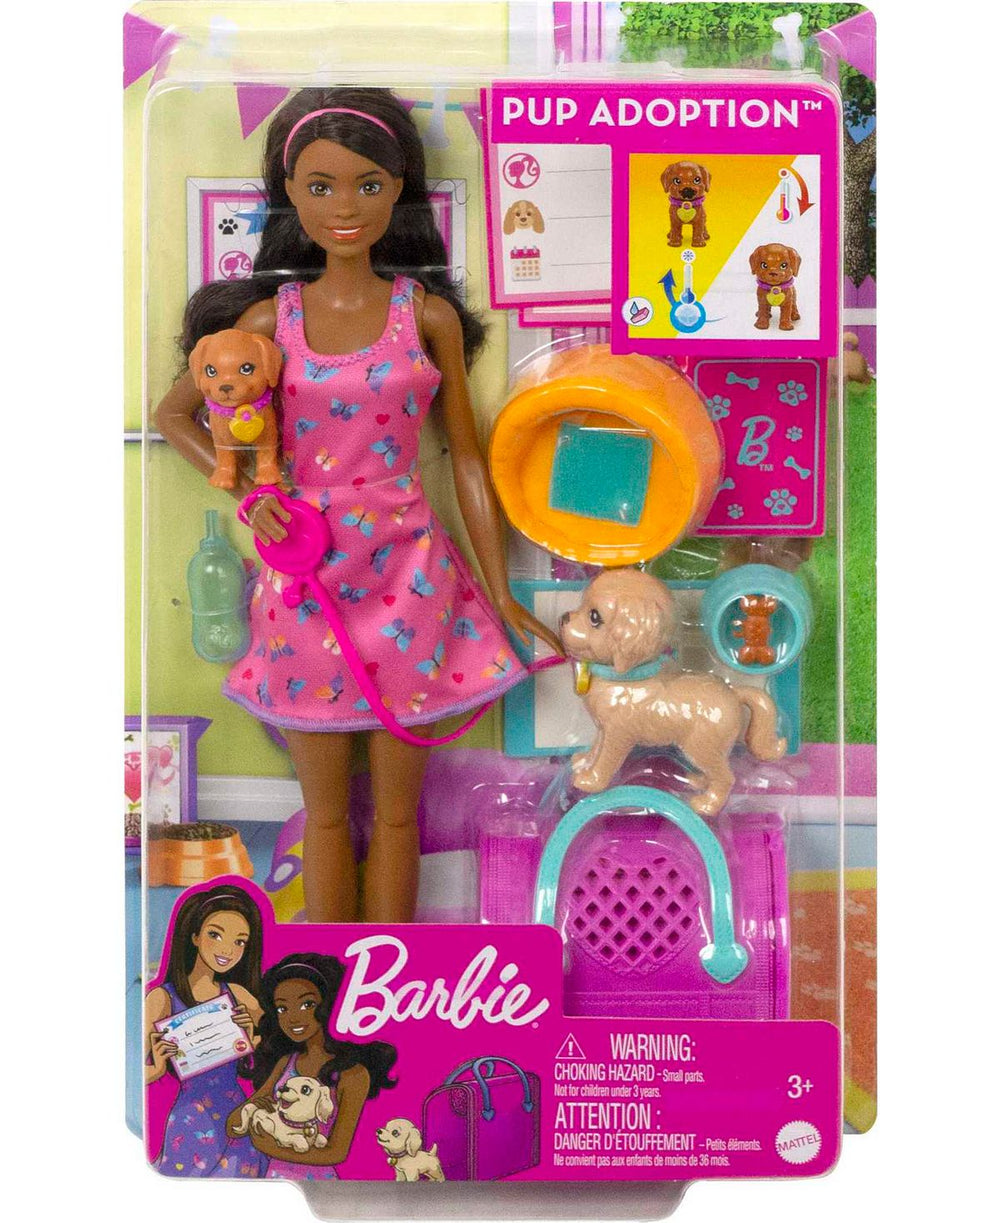 Barbie Pup Adoption Playset with Color-Change Puppies and Accessories